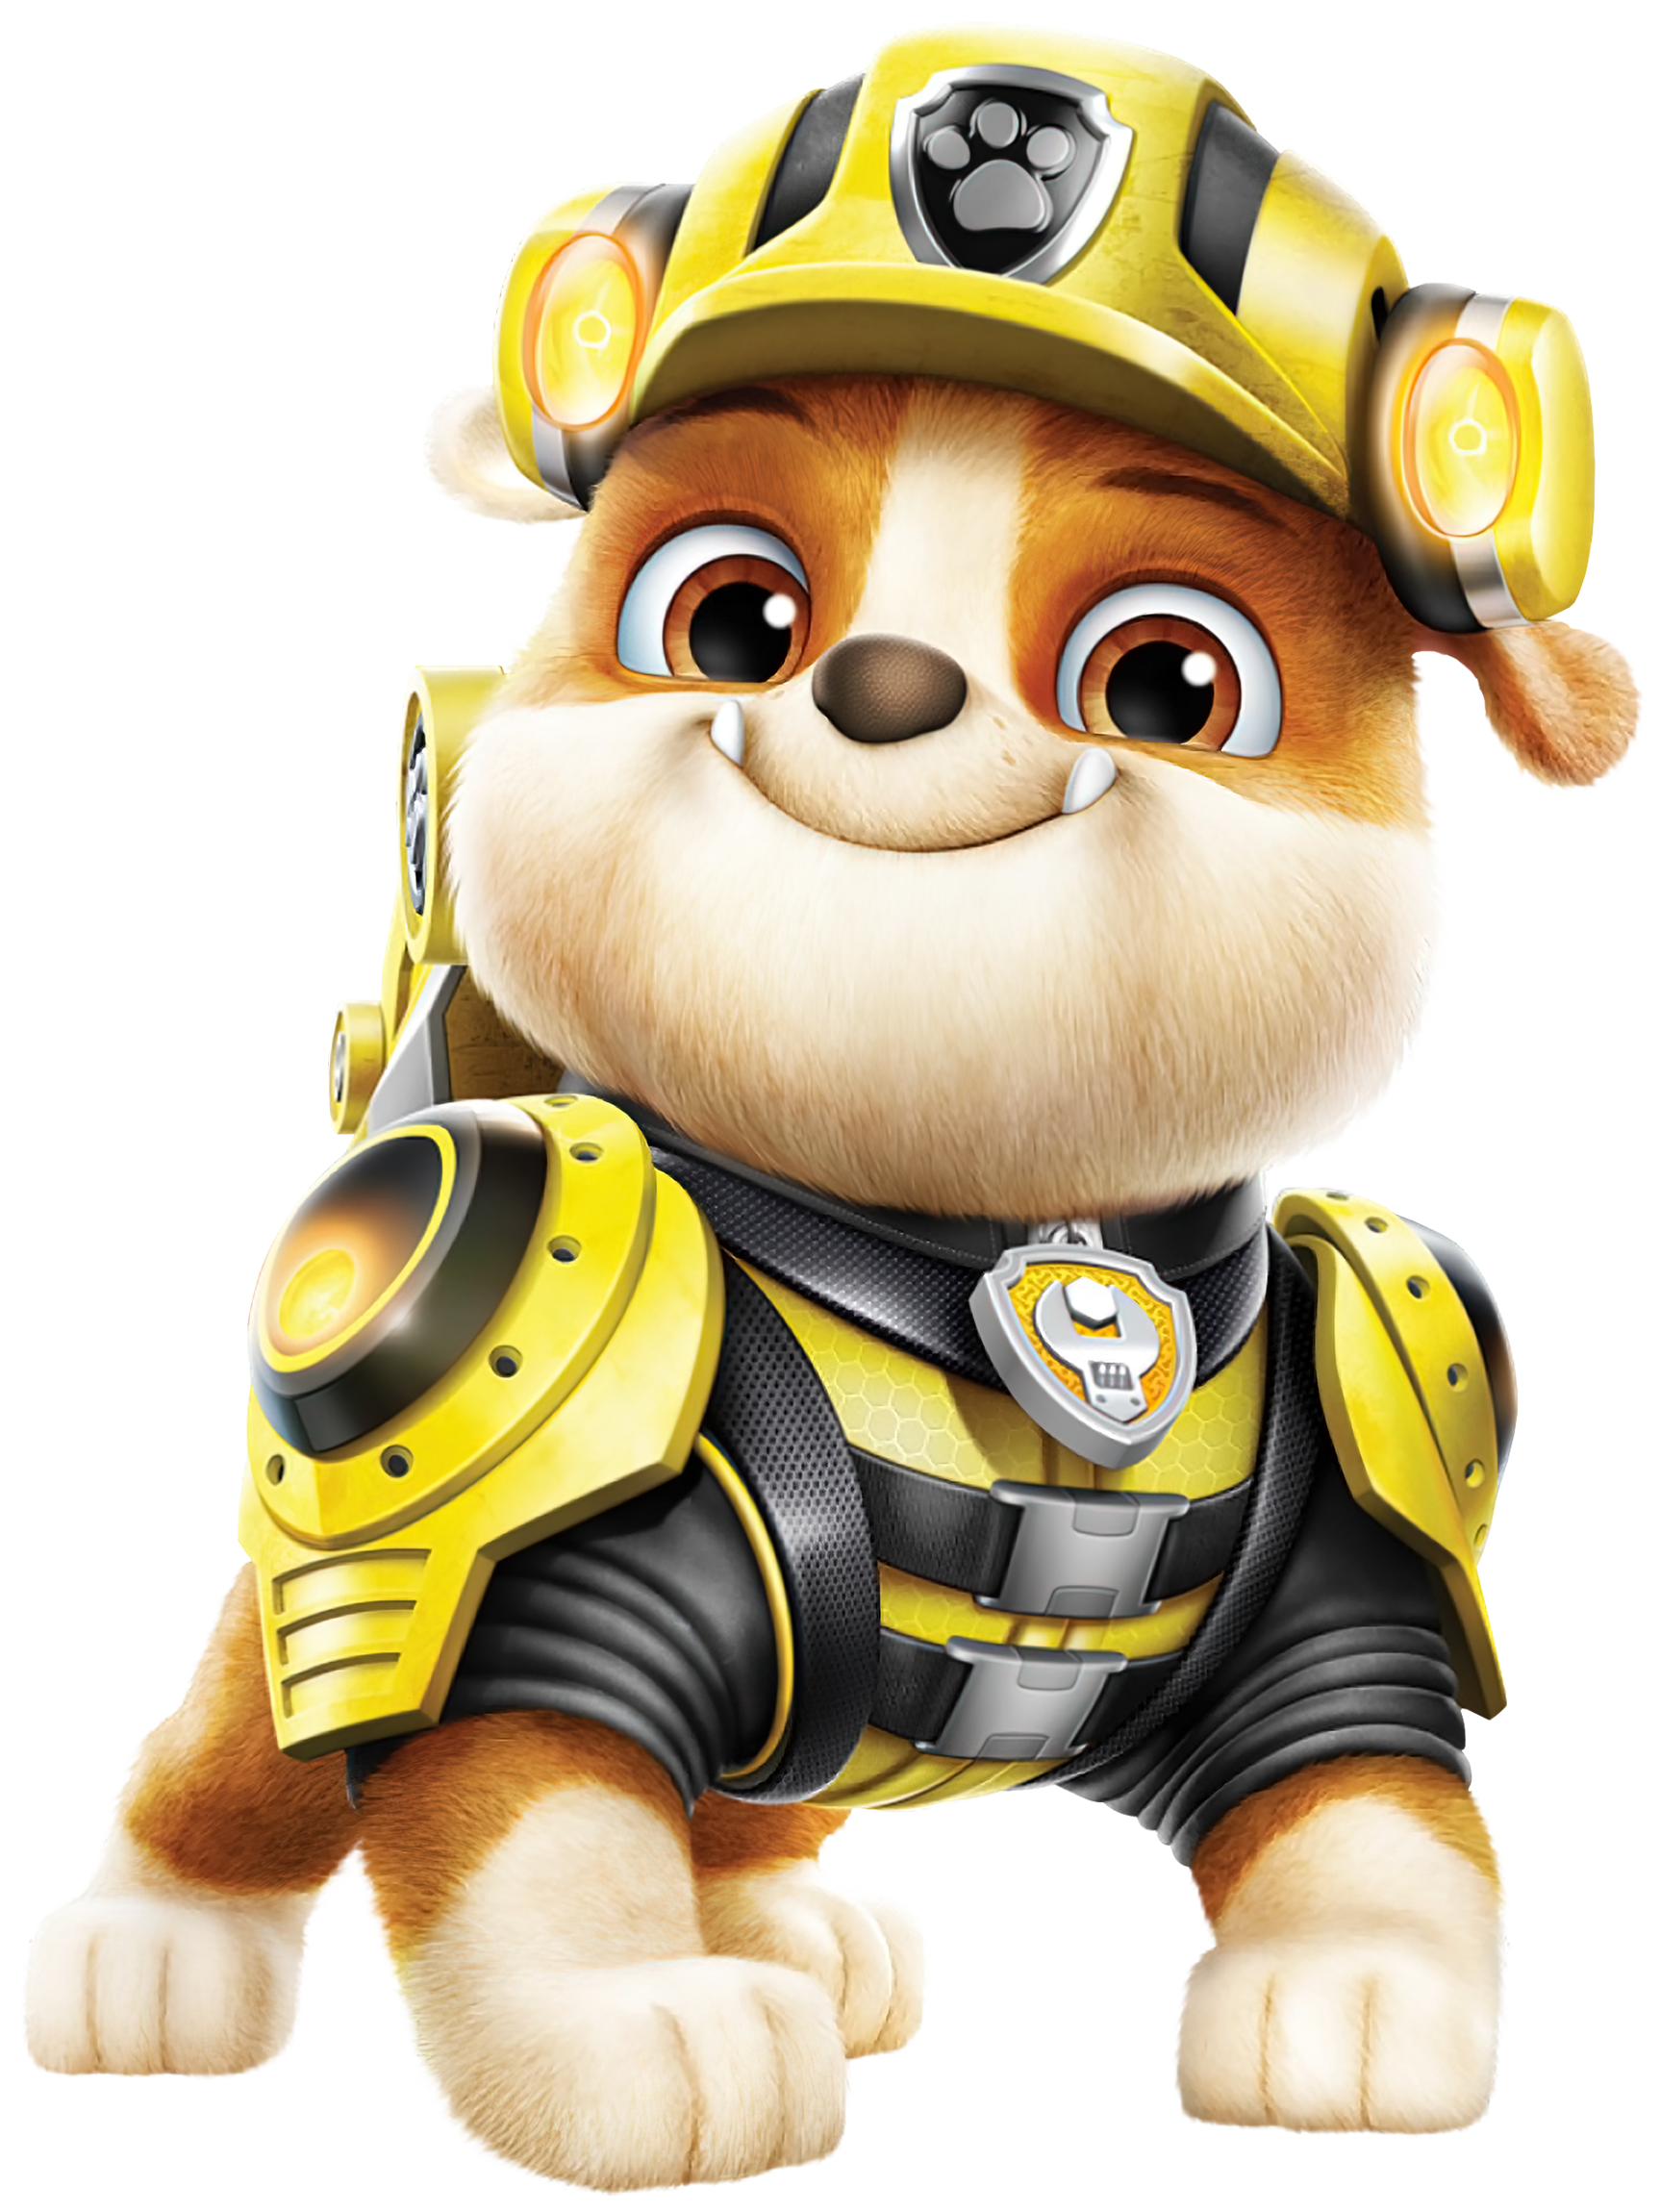 Rubble PAW Patrol PNG Cartoon Image​ | Gallery Yopriceville - High-Quality  Free Images and Transparent PNG Clipart